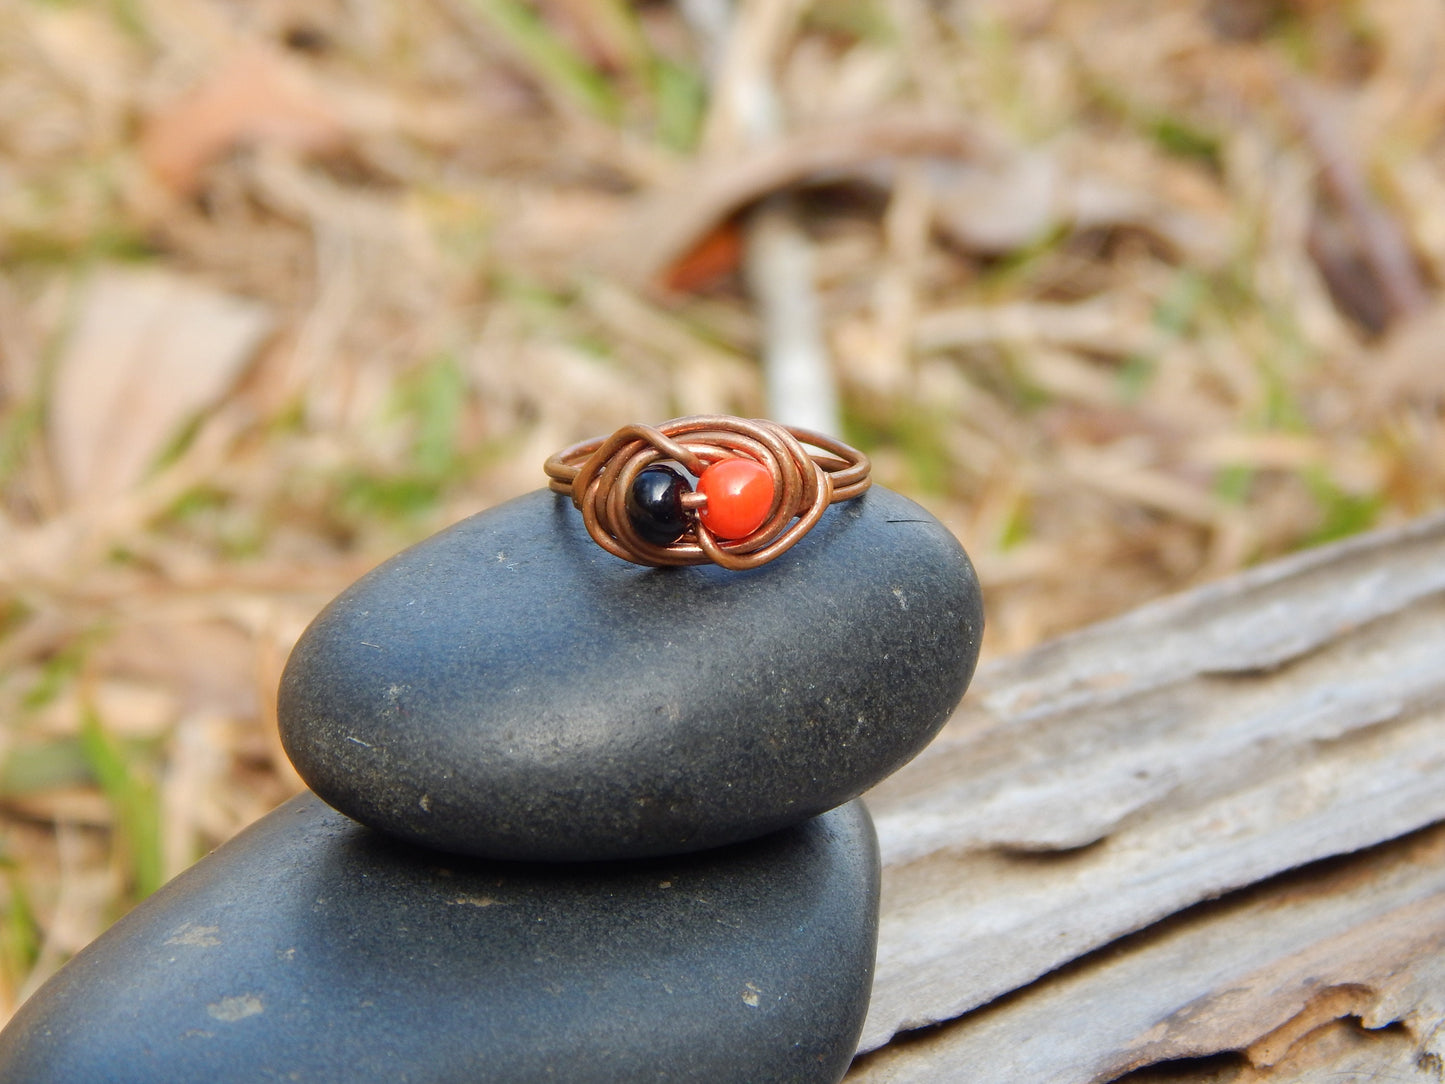 Wire wrapped size 4.5 copper and glass ring